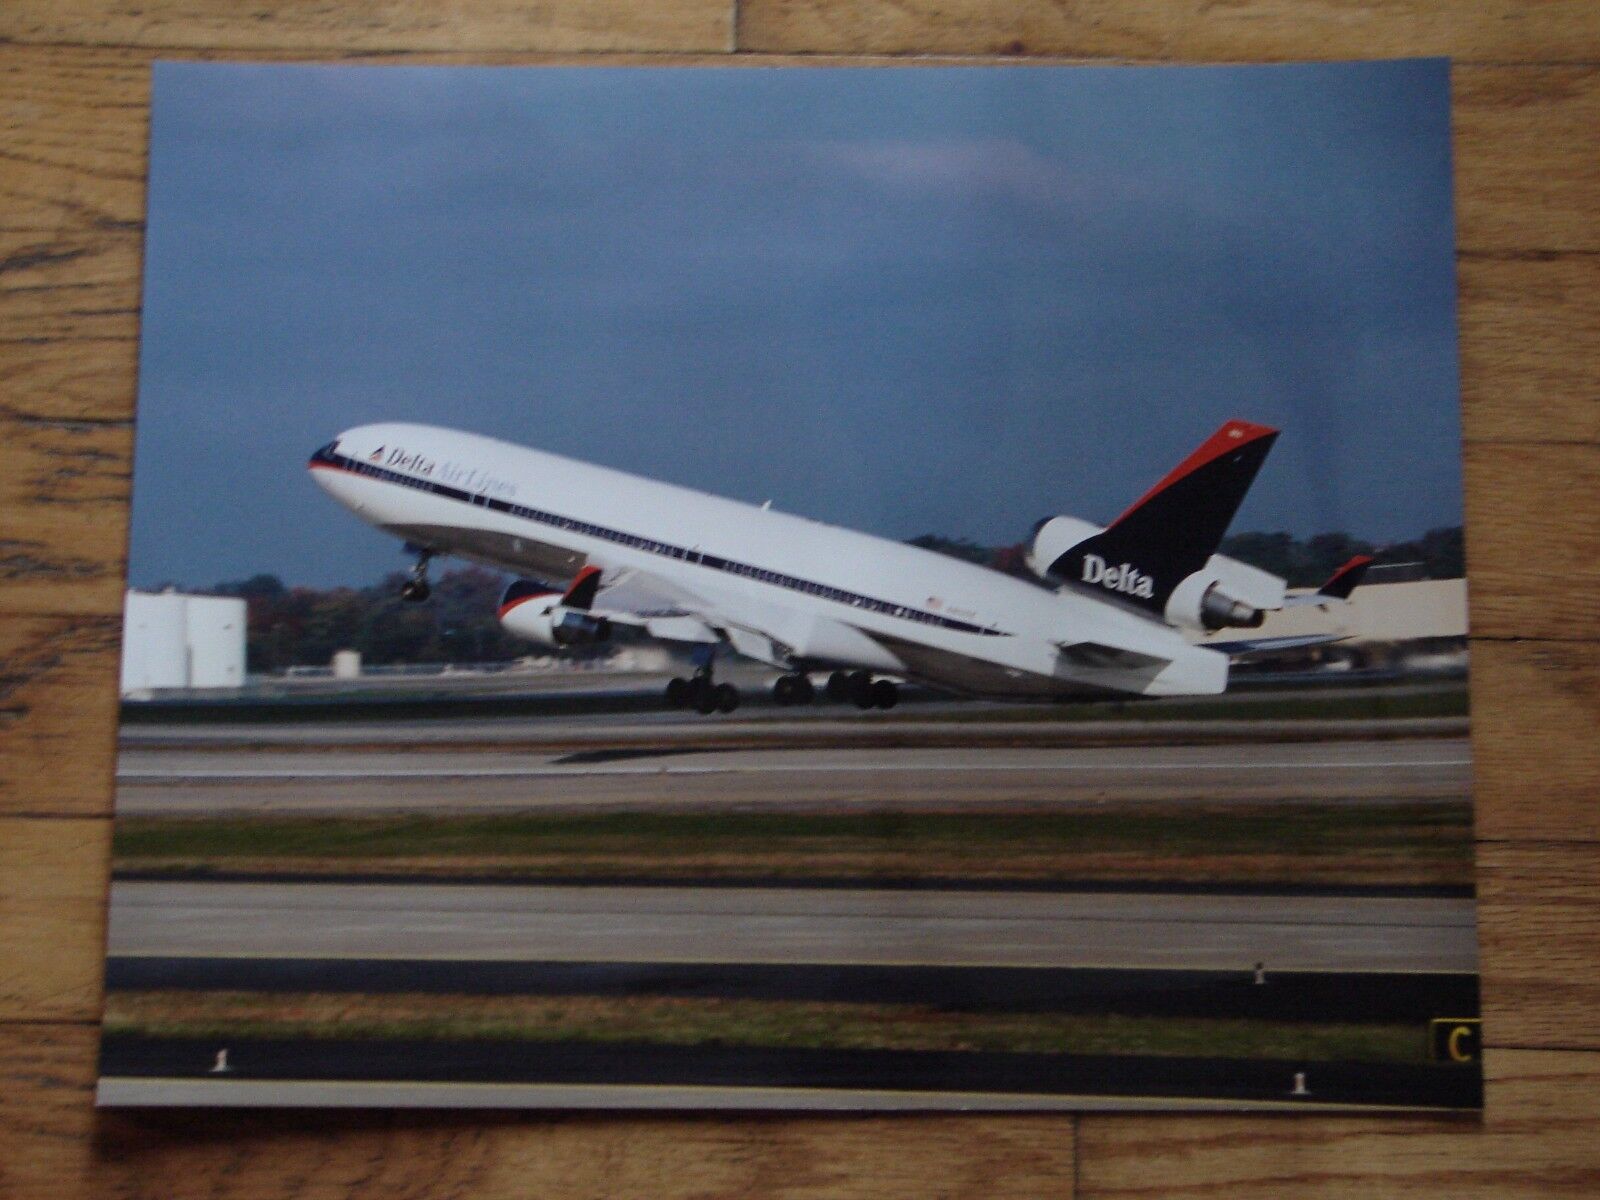 DELTA - LARGE PHOTO -  DELTA  MD 11 - ON TAKE OFF - 20 X 16